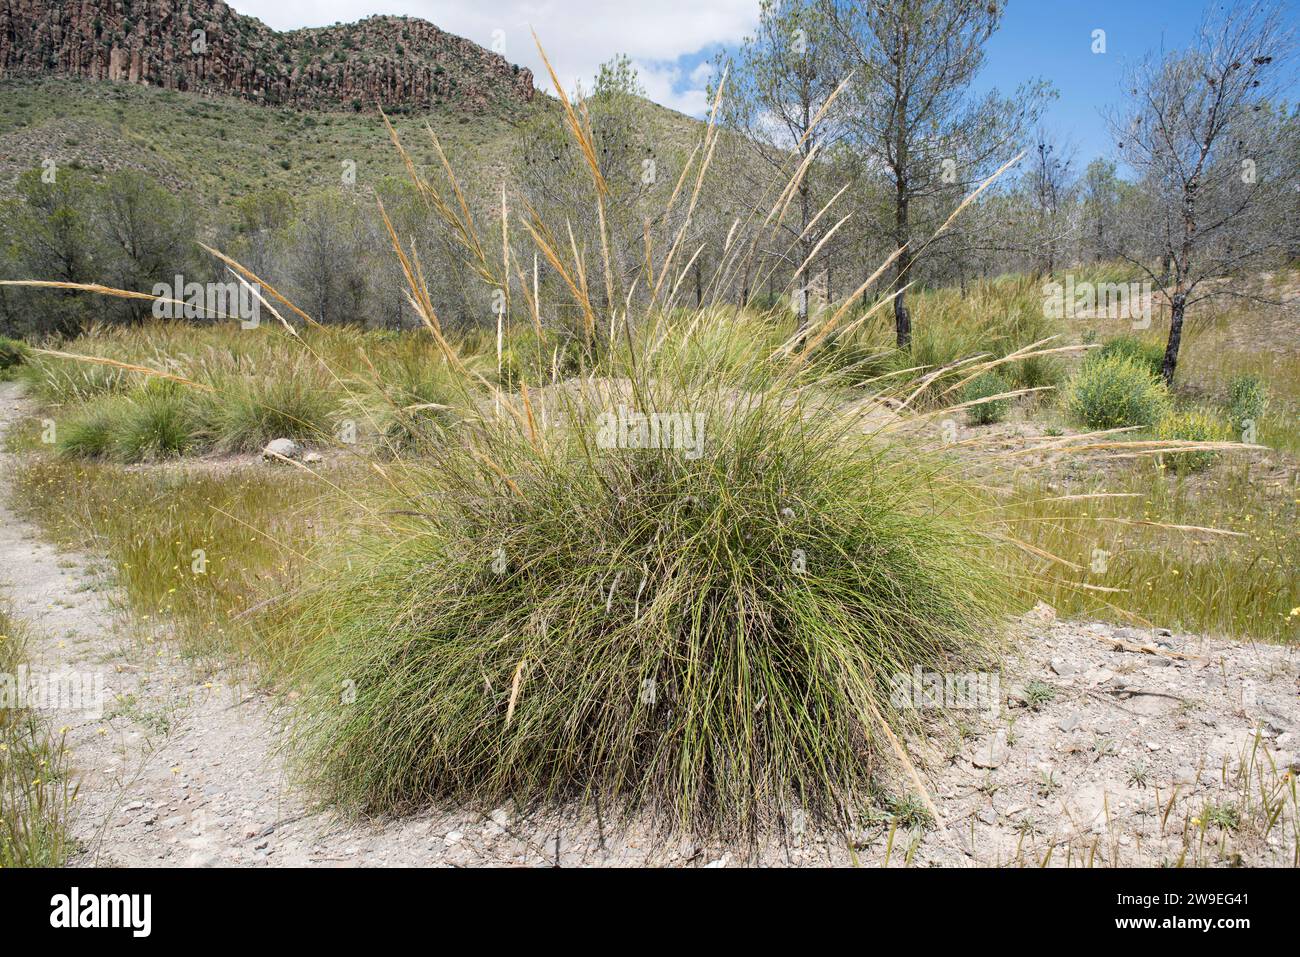 Esparto (Stipa tenacissima) is a perennial herb endemic to South Iberian Peninsula and north Africa. Produces a fiber used to manufacture basketry and Stock Photo